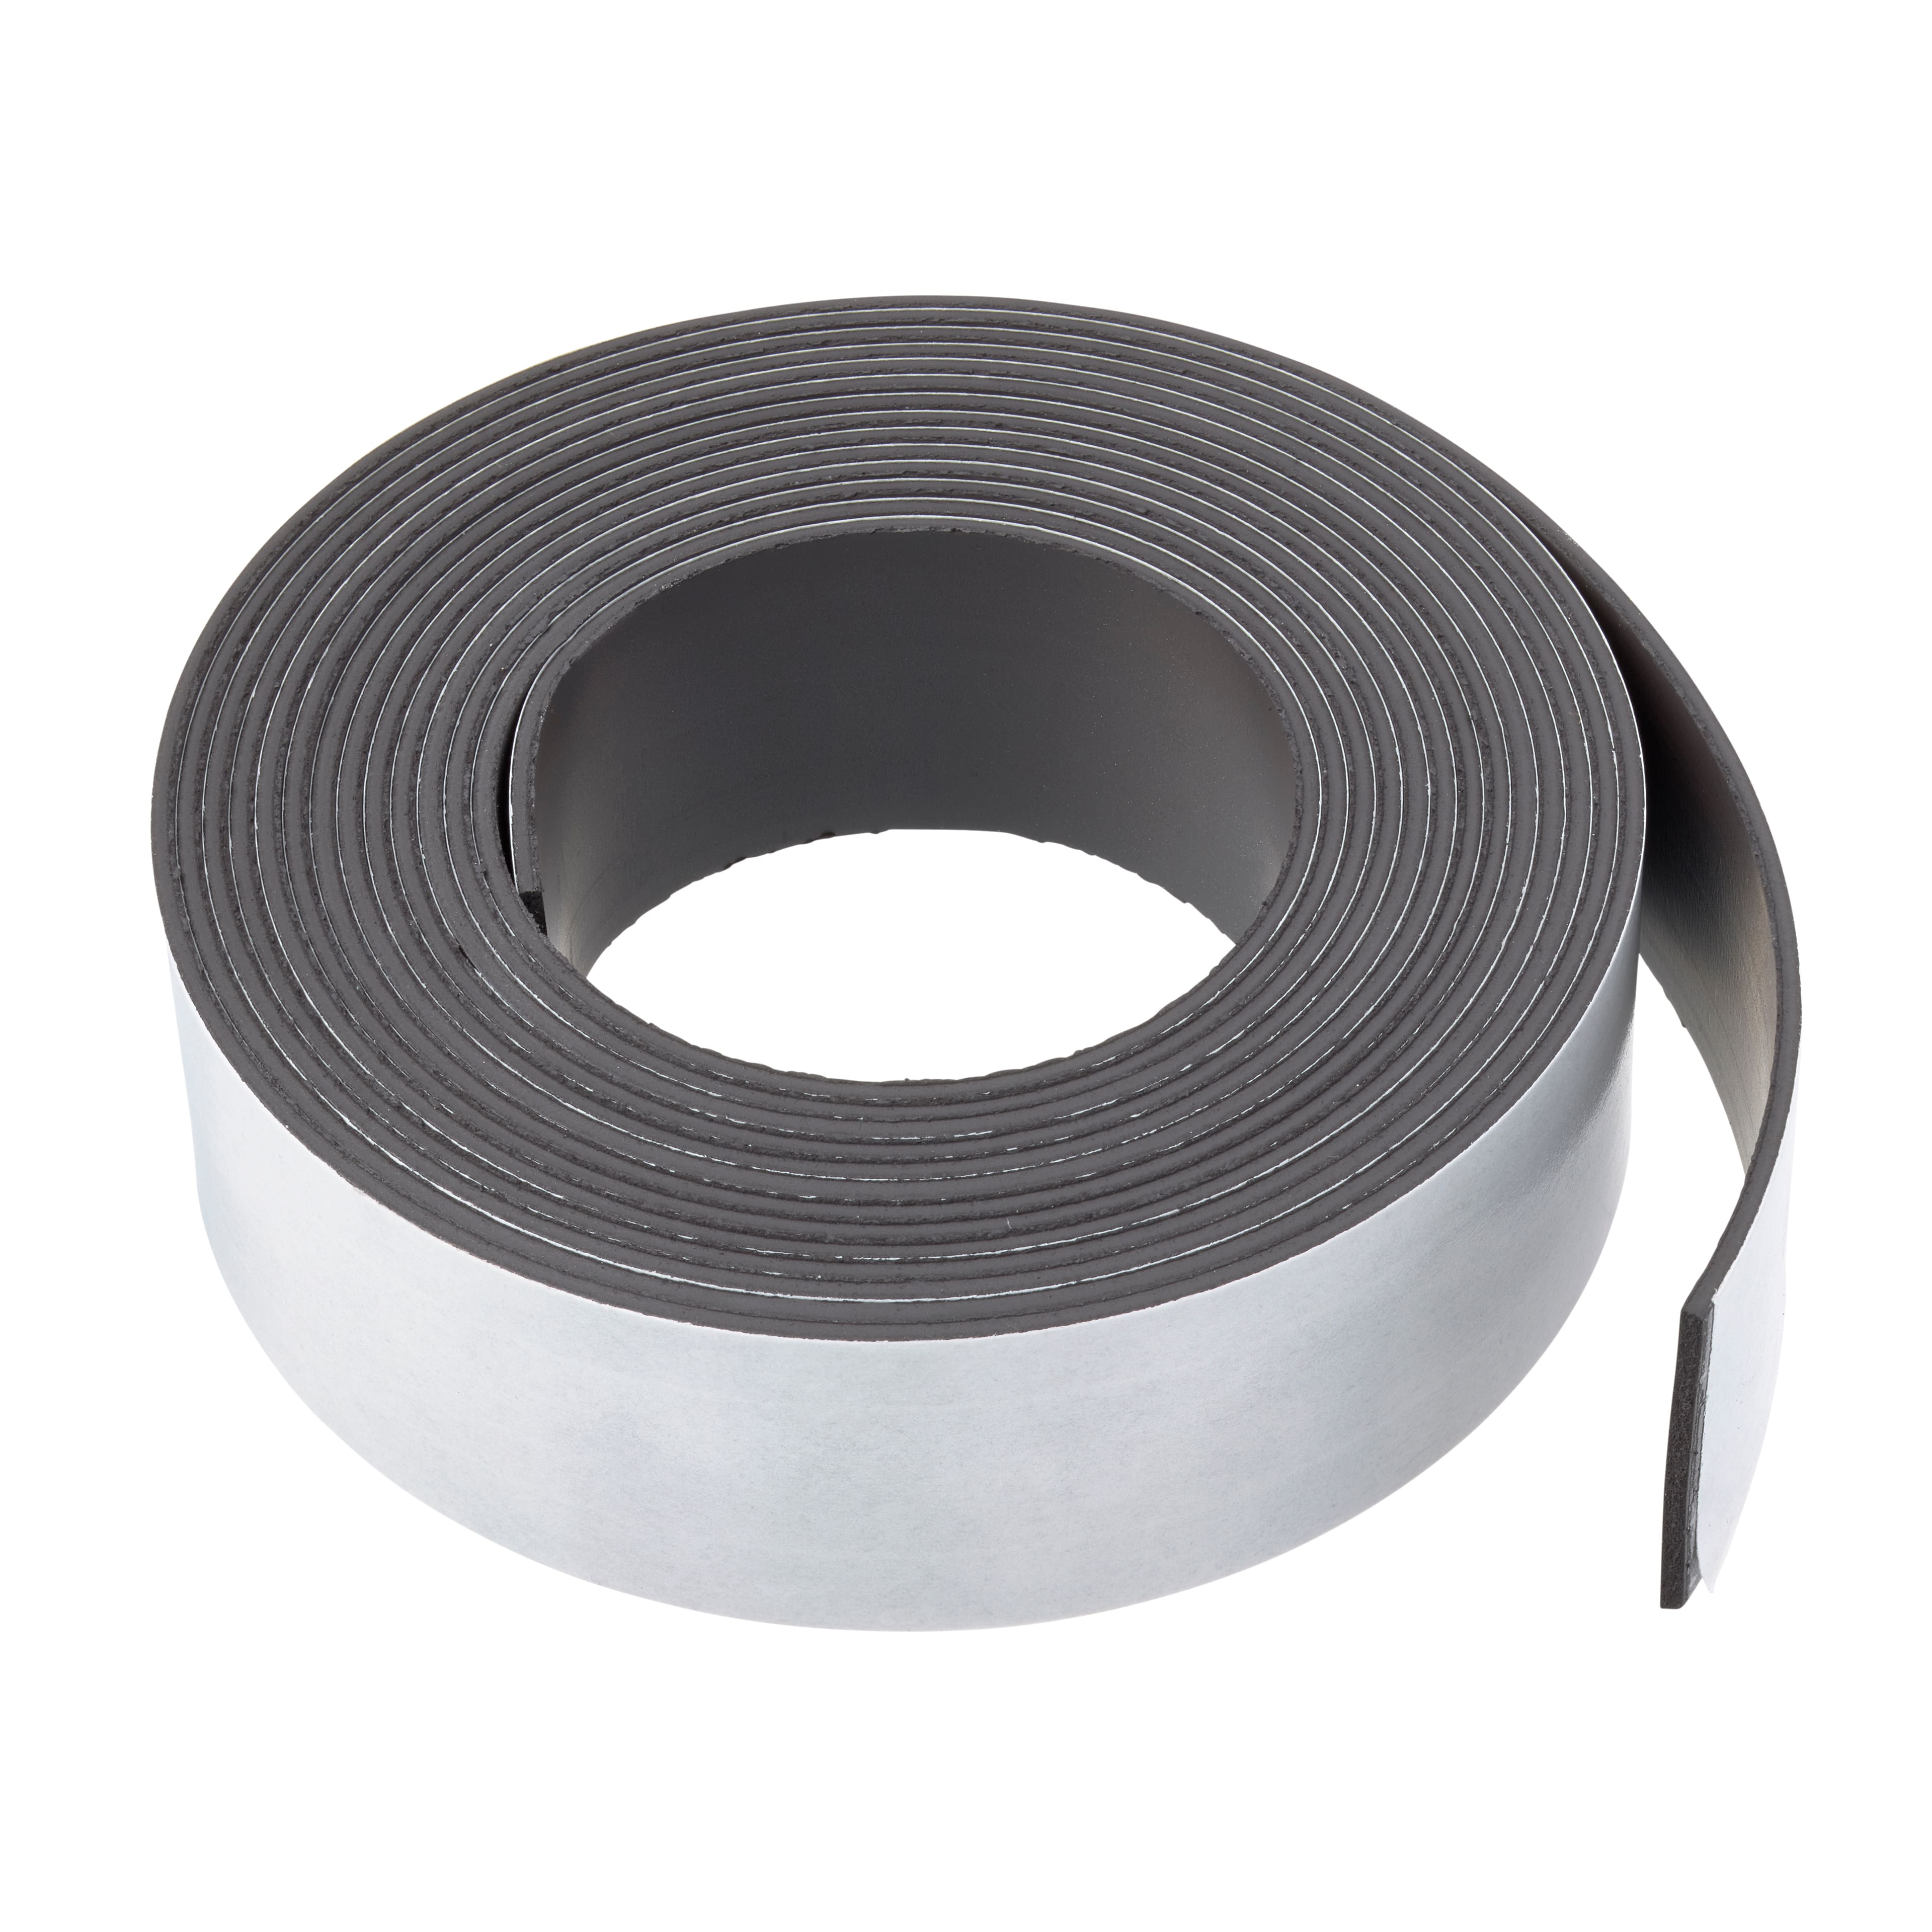 Flexible Magnetic Tape or Magnetic Strip for commercial applications